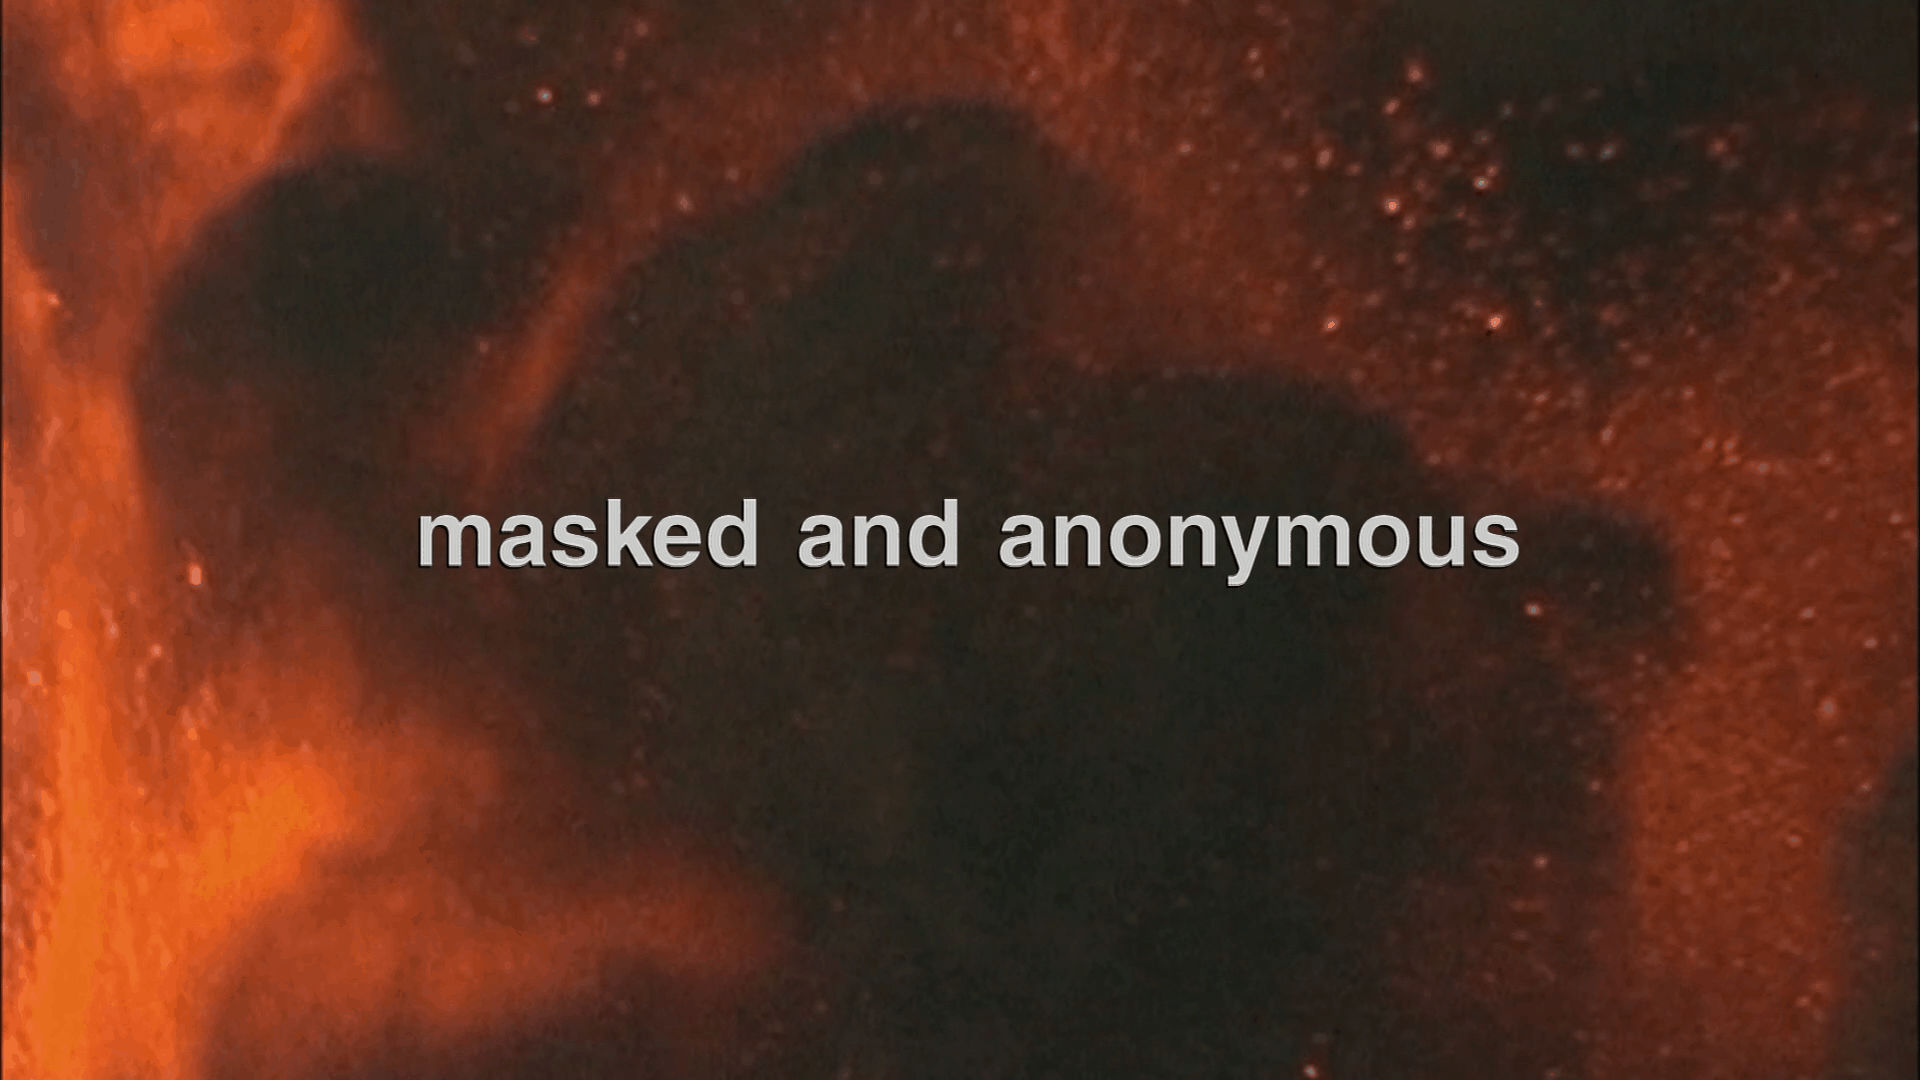 masked and anonymous blu-ray title